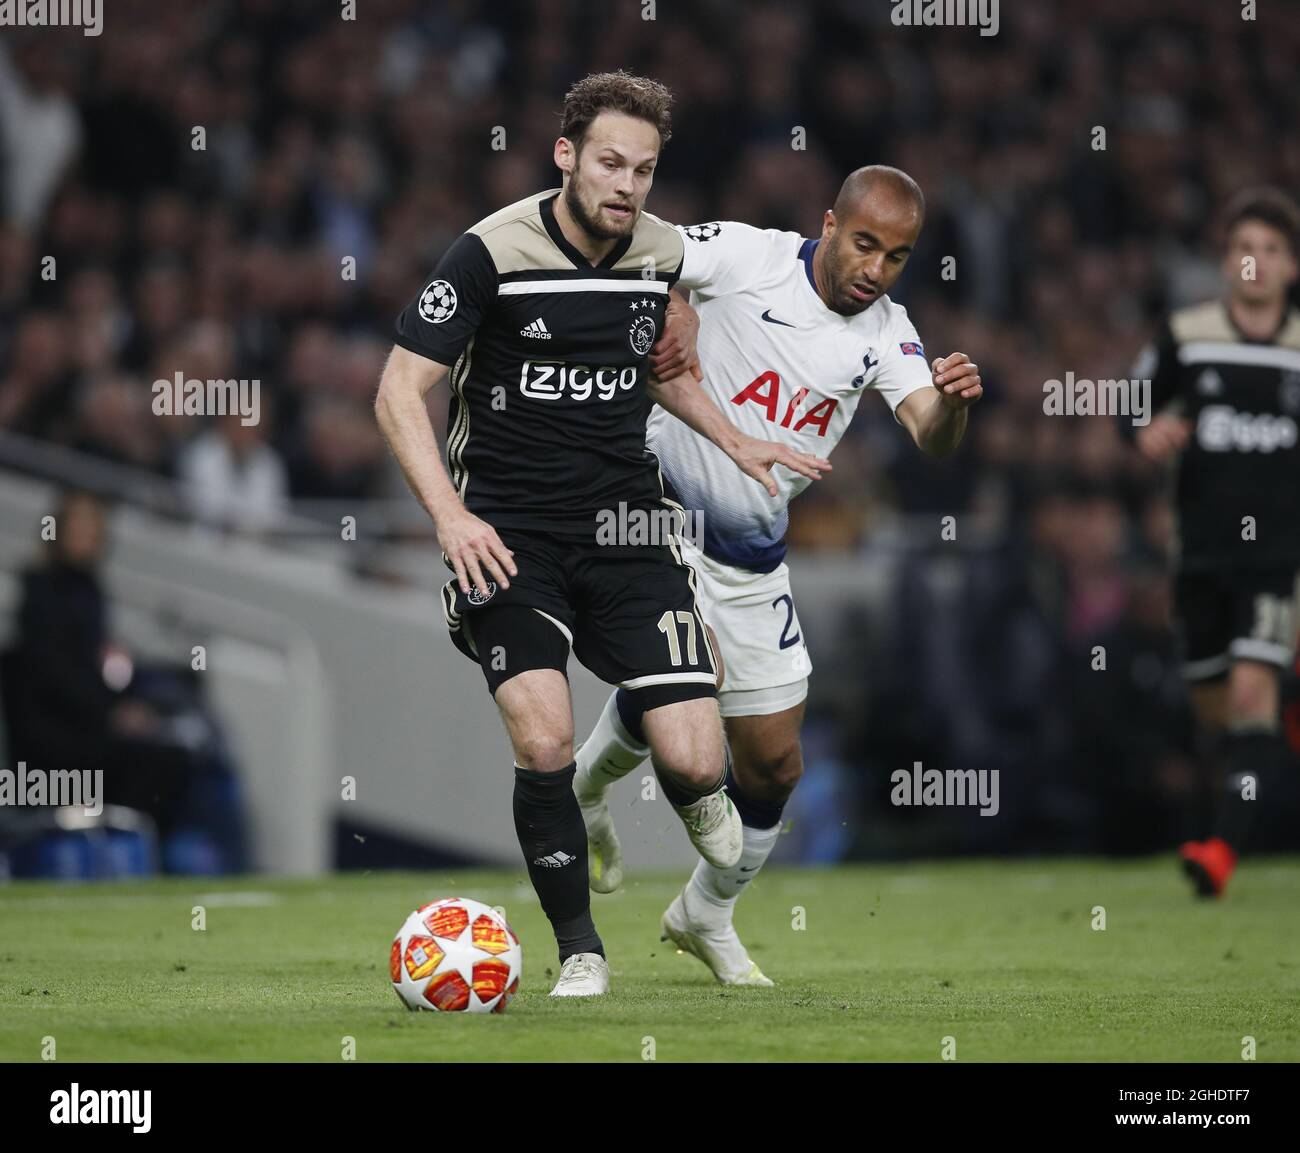 Daley Blind of Ajax tackeld by Lucas Moura of Tottenham during the UEFA  Champions League match at the Tottenham Hotspur Stadium, London. Picture  date: 30th April 2019. Picture credit should read: David